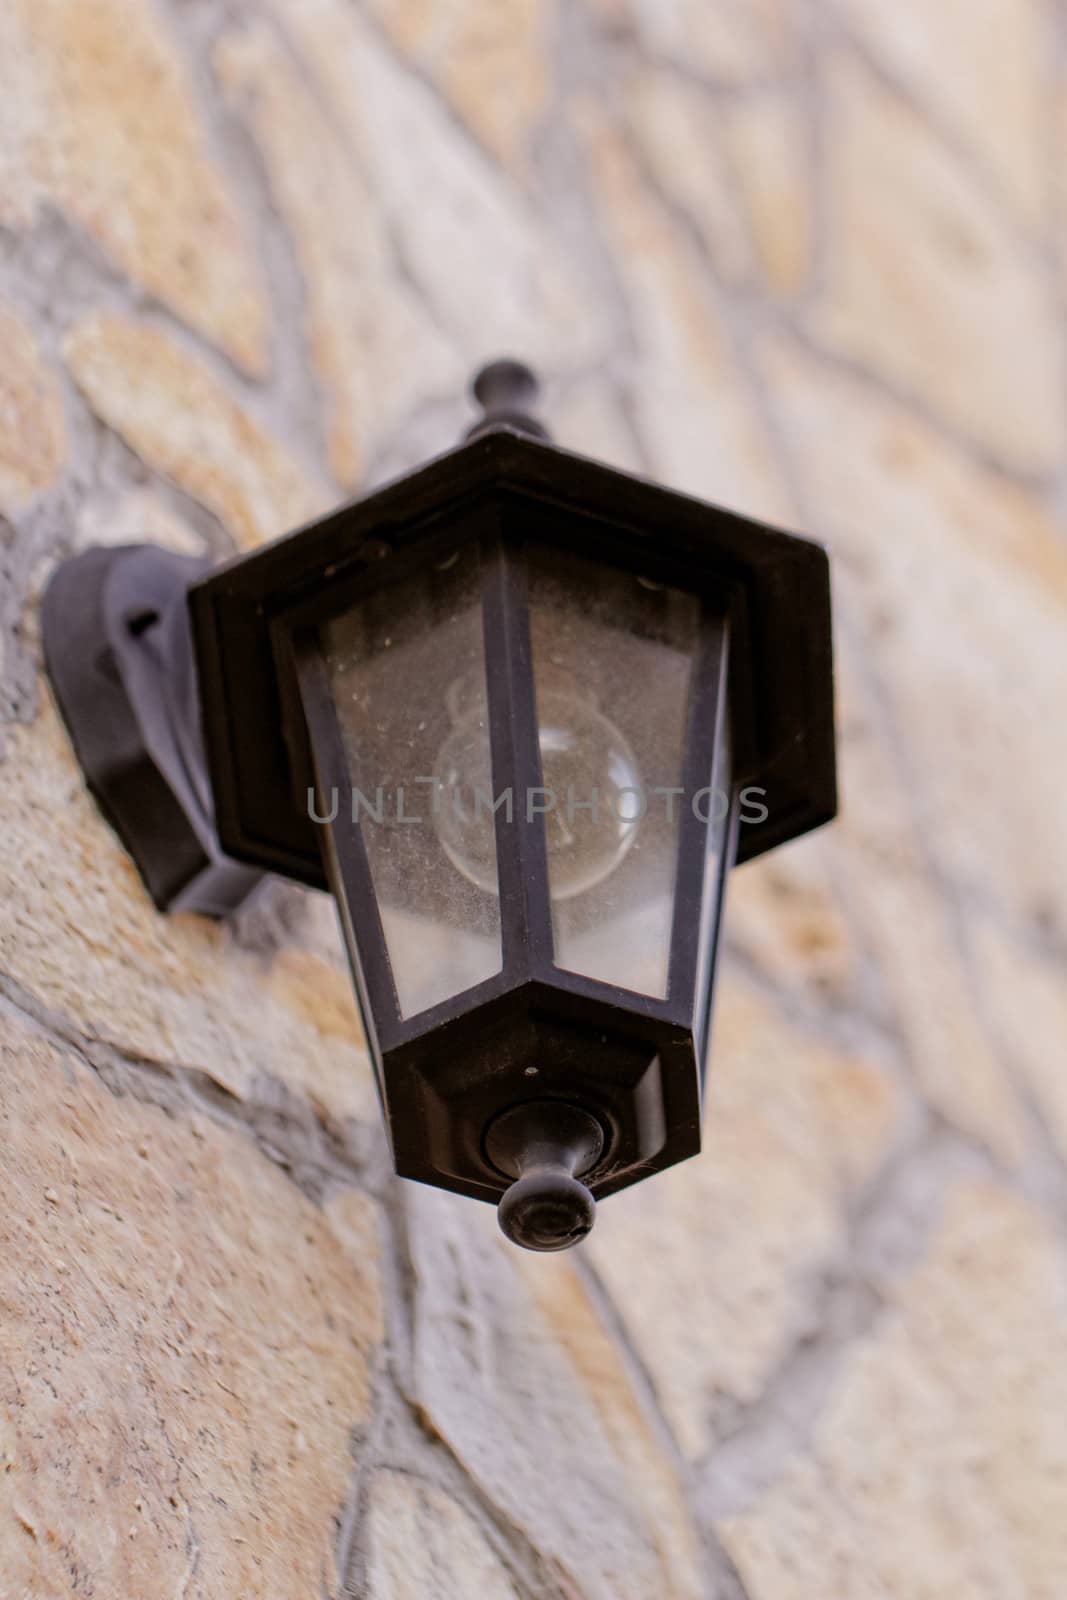 antique black lantern side by building (stone wall)